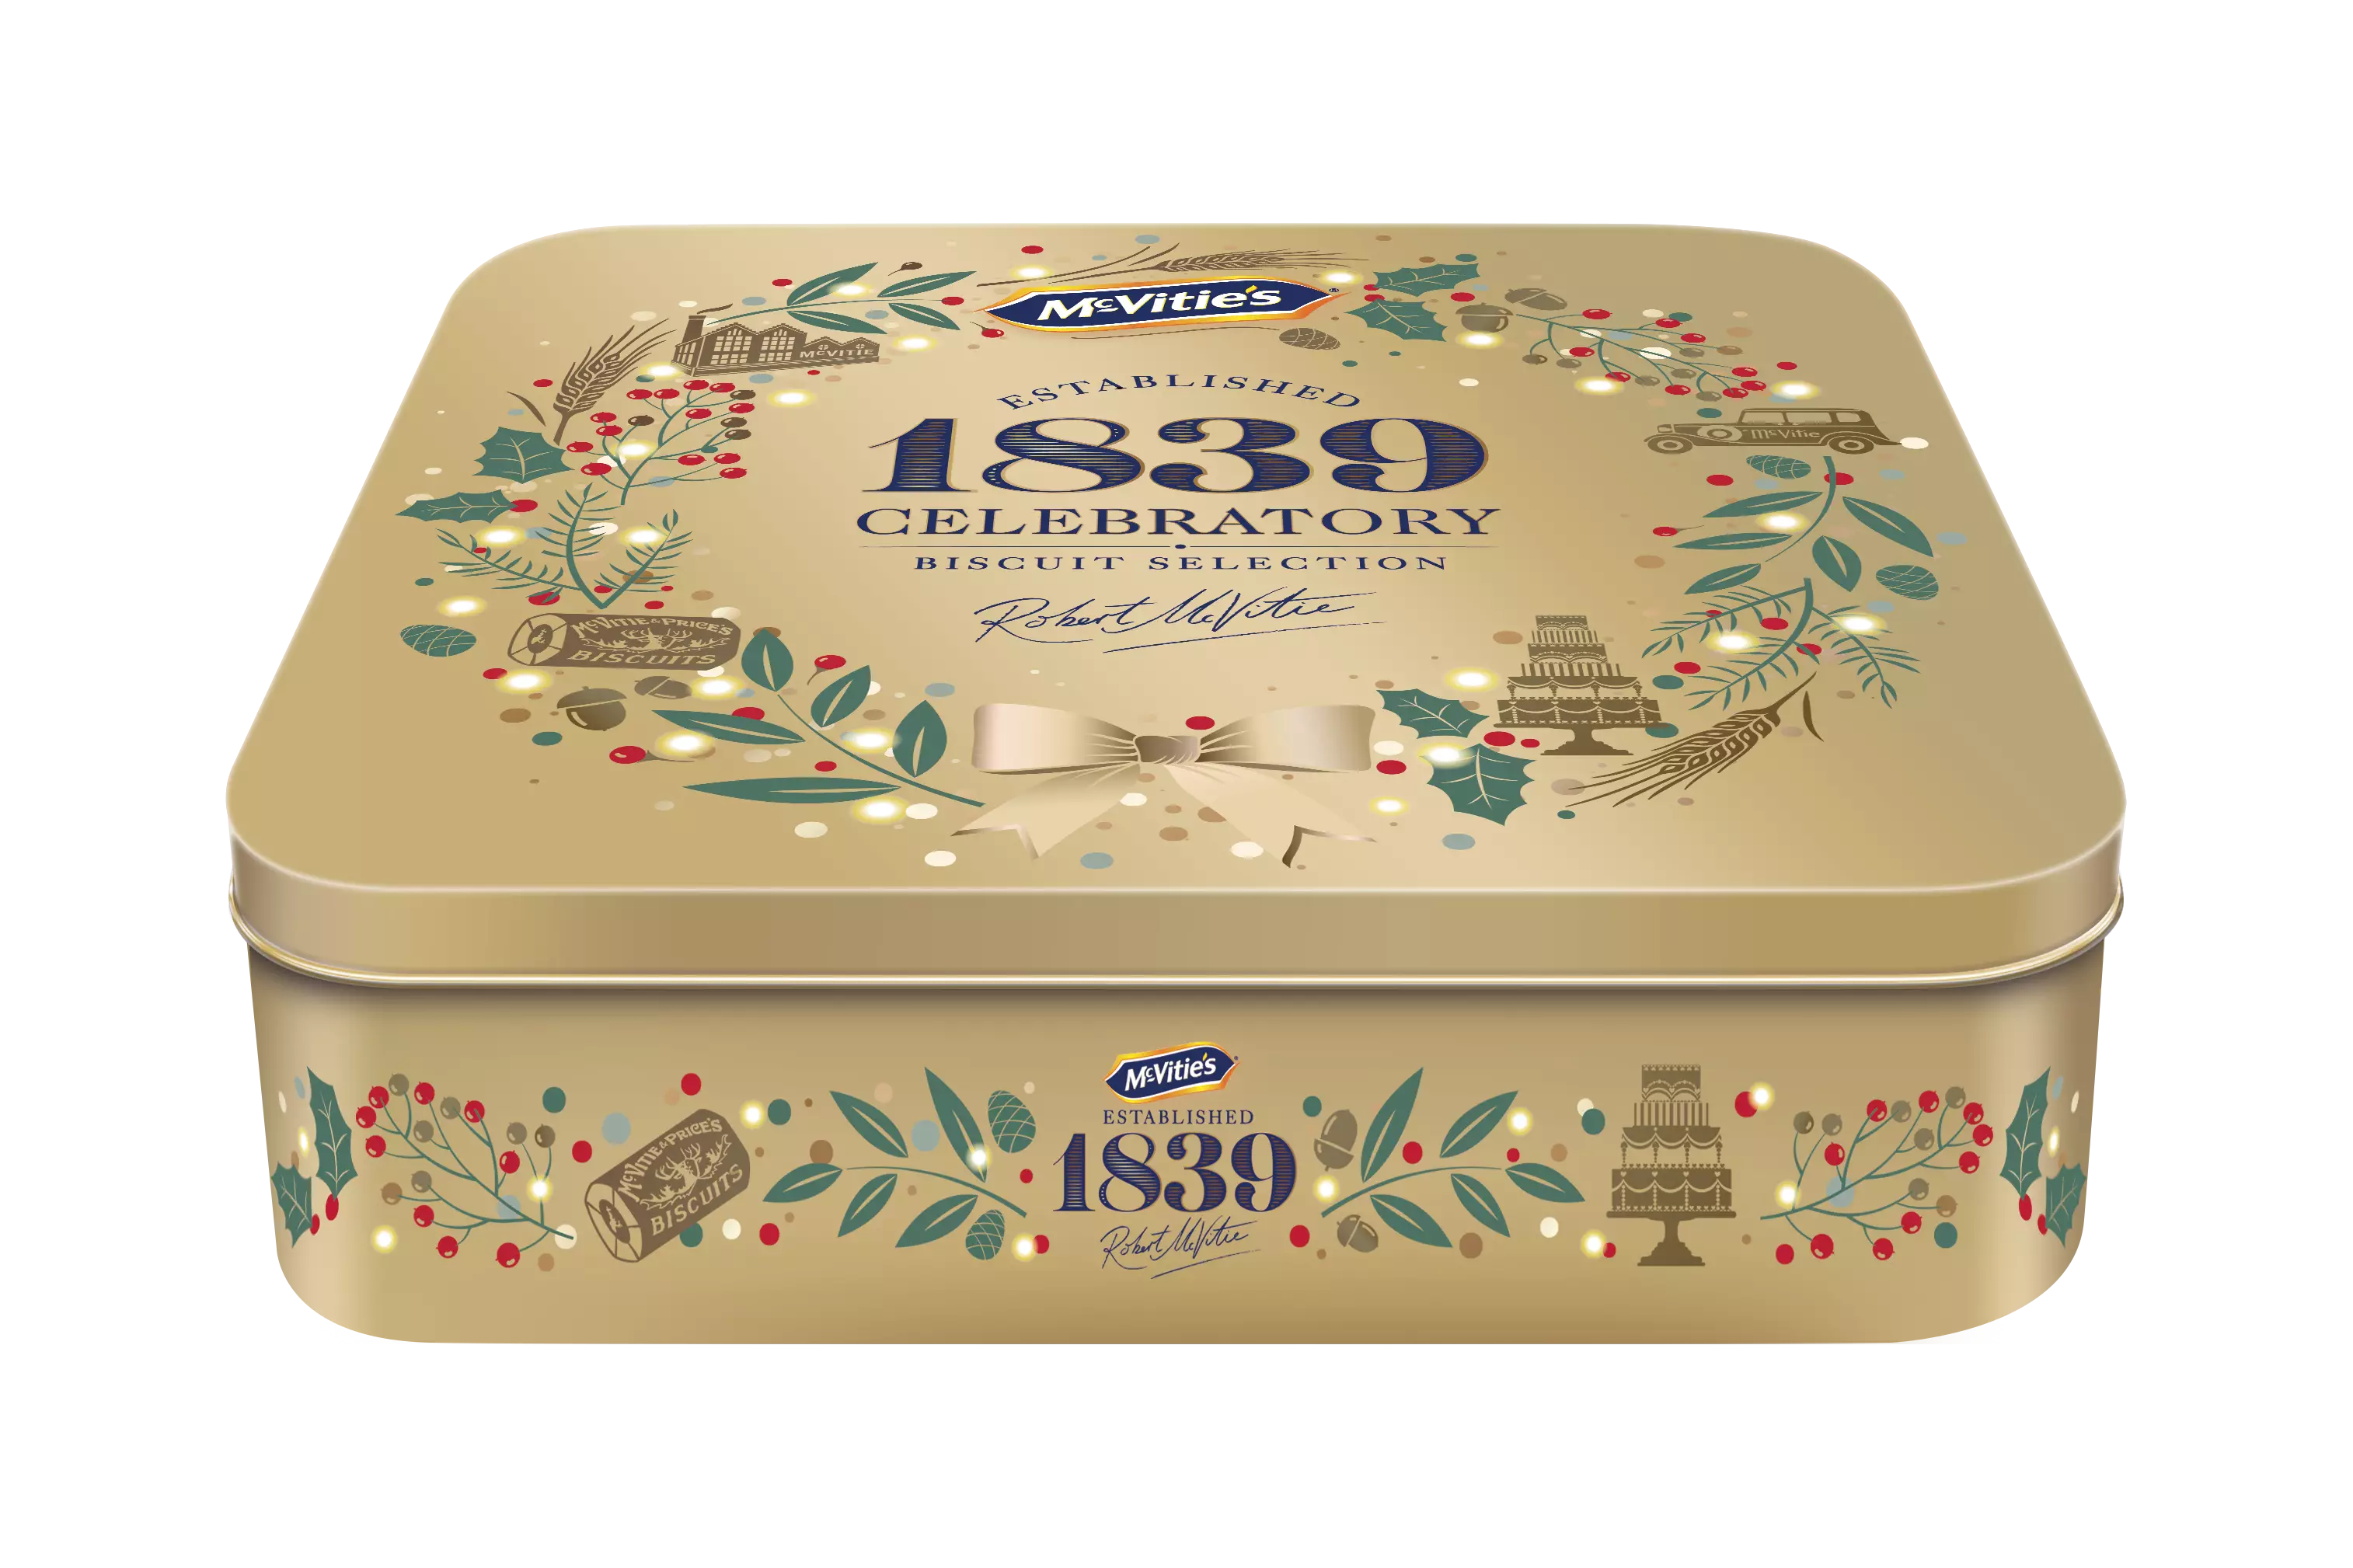 The heritage tin is another Christmas keepsake (